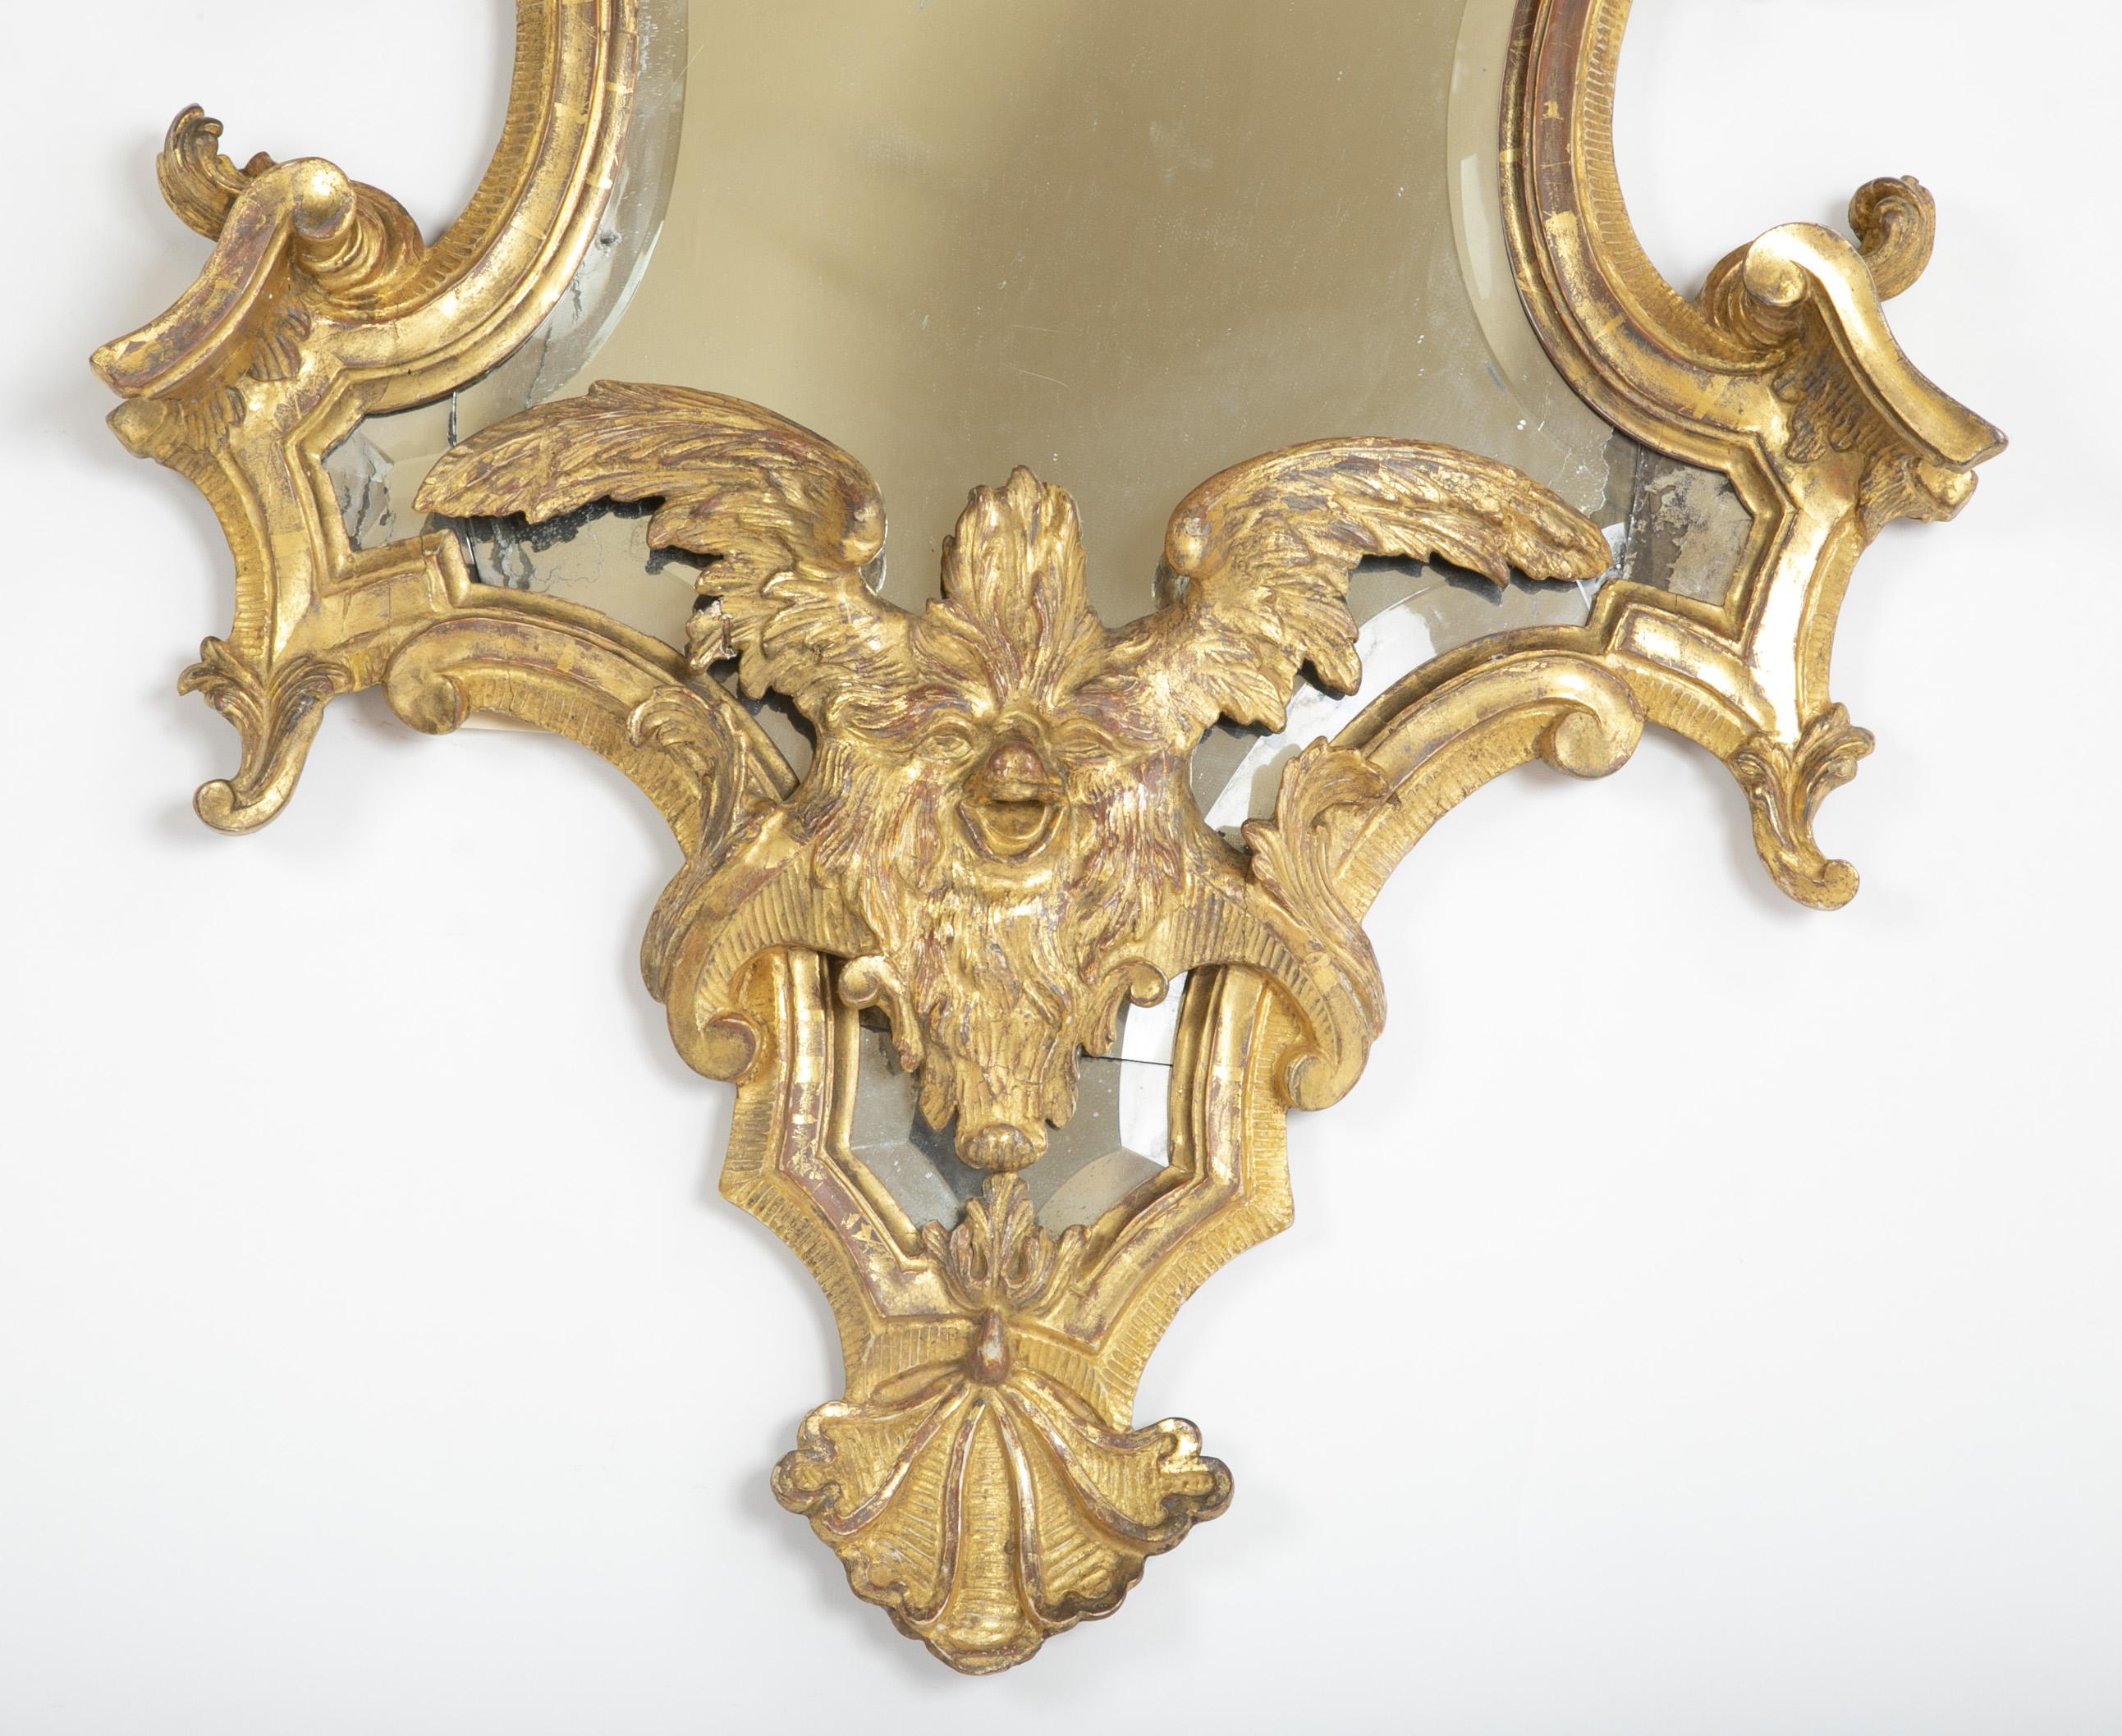 Giltwood Baroque Italian Mid-18th Century Gilt Mirror with Faces